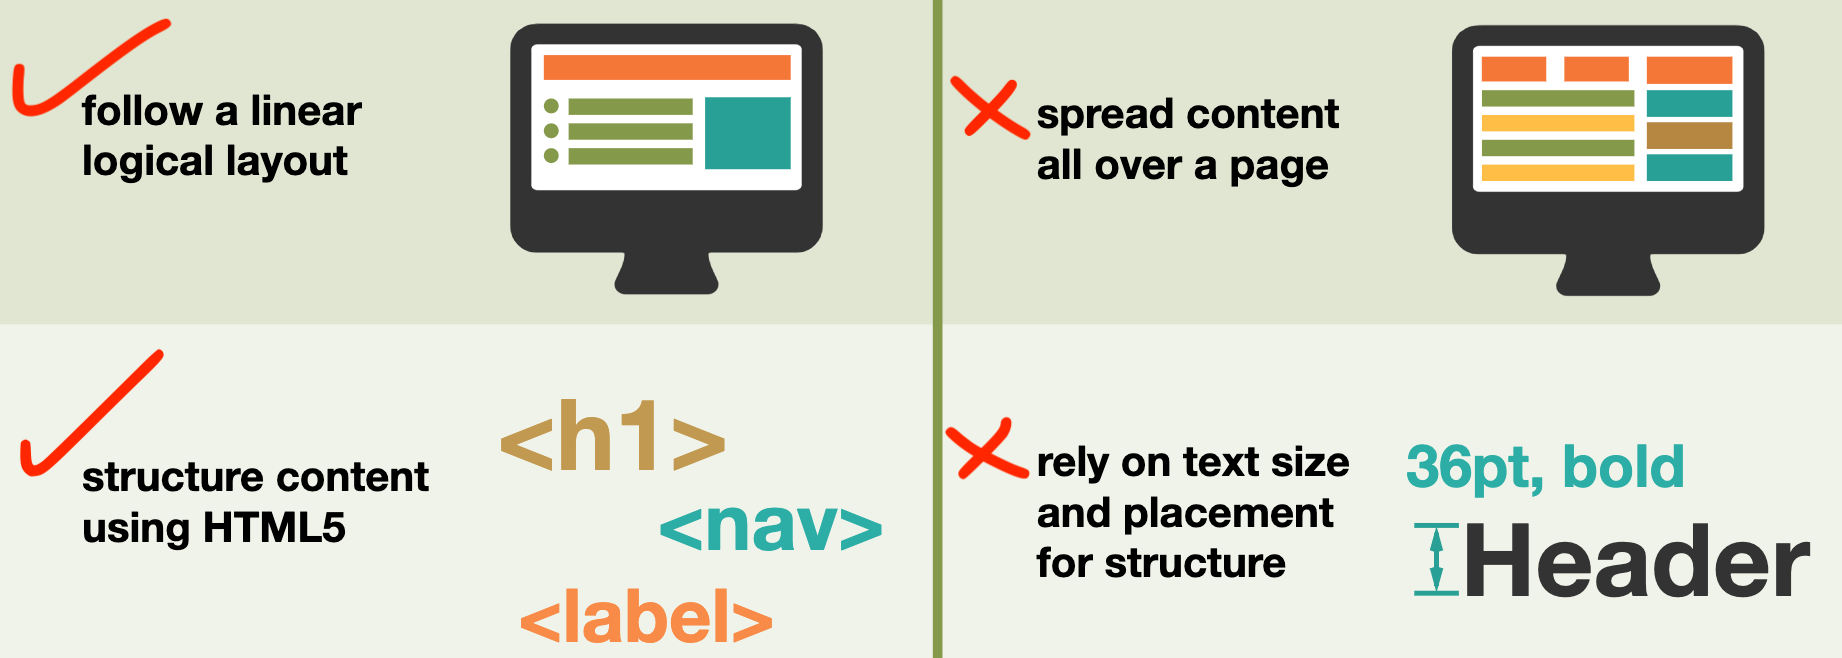 do follow a linear layout and structure content using HTML5, dont 